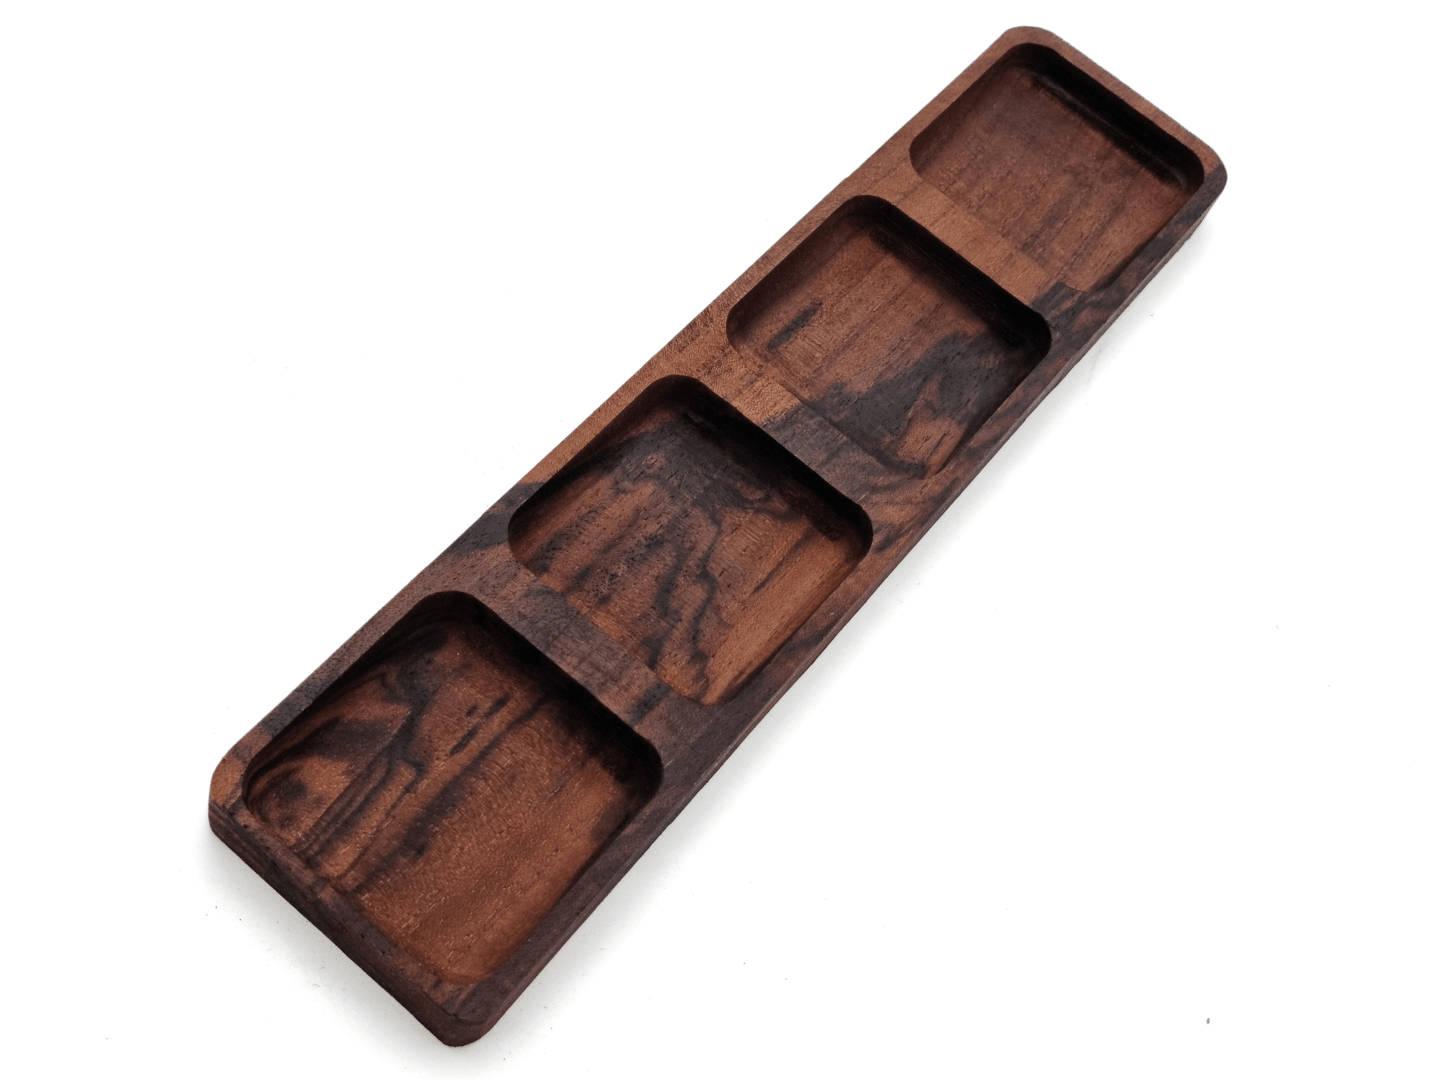 Walnut Divided Serving Plate - Snack Plate - Saucer Plate